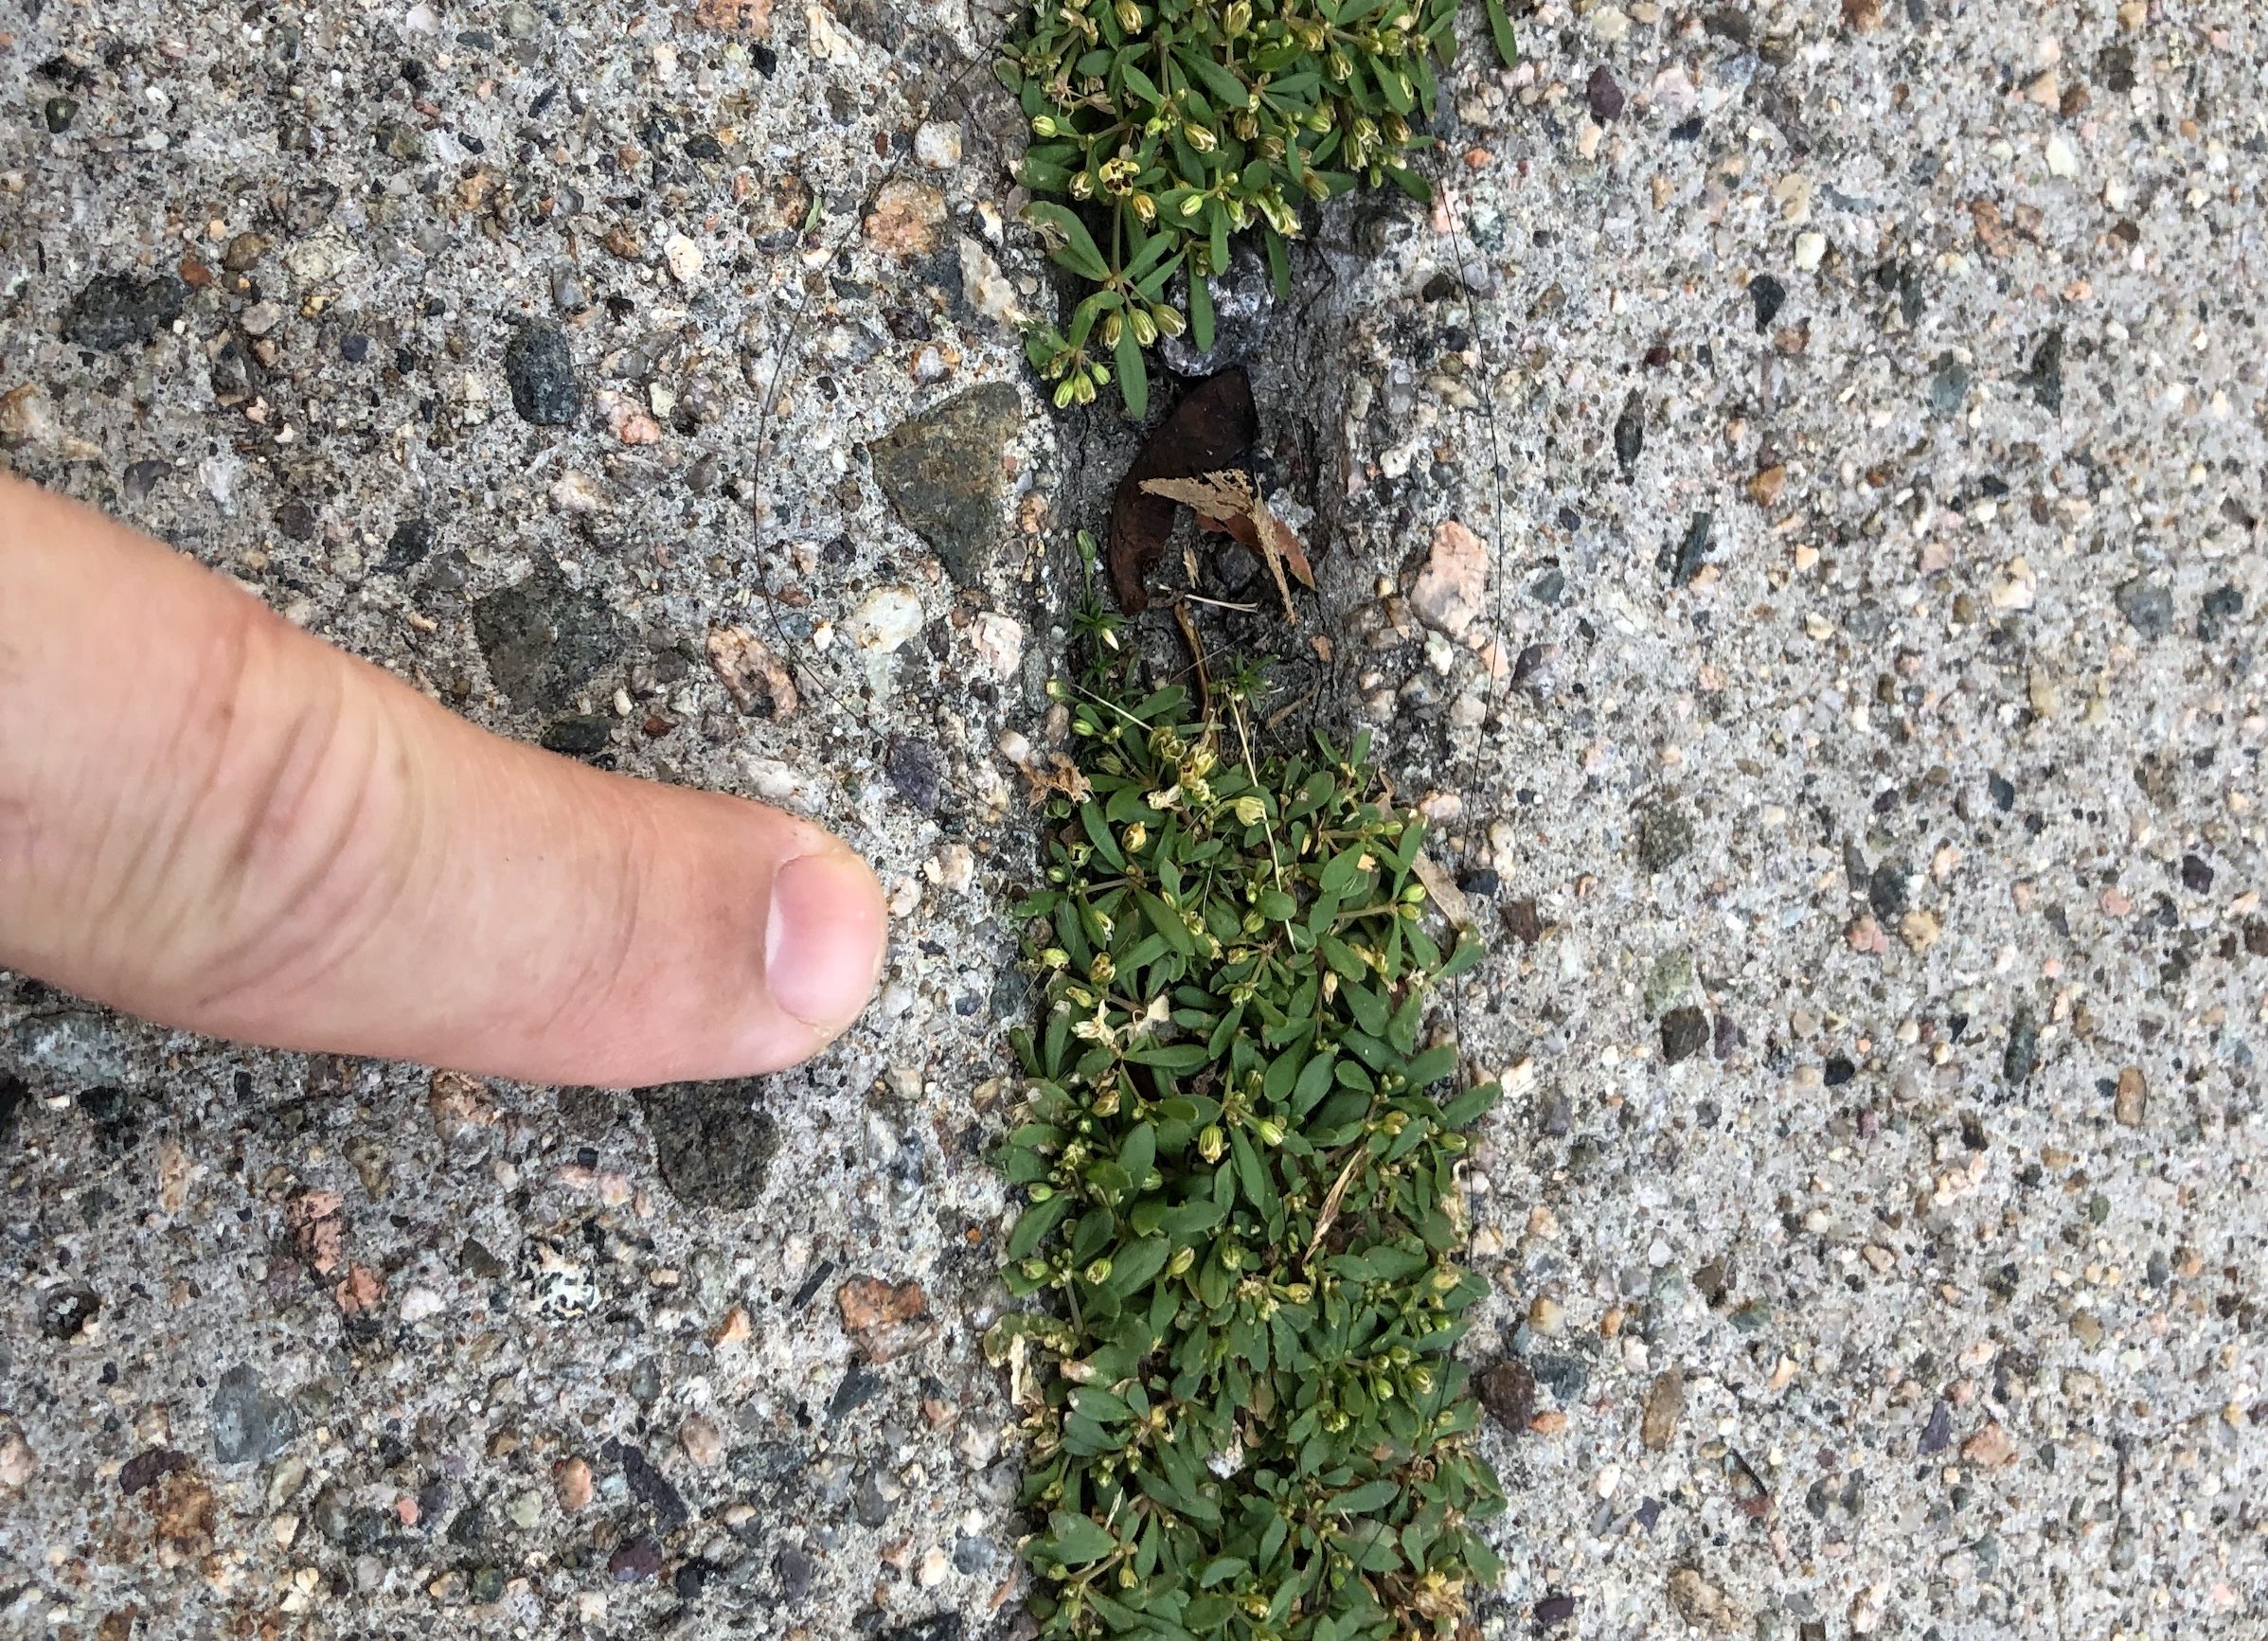 A clump of carpetweed grows out of a sidewalk crack. The plant features small leaves that radiate like spokes from a fingernail-sized wheel out of a central stem, with 3-8 leaves to each node. The plant also features tiny greenish-white flowers with 5 petals.